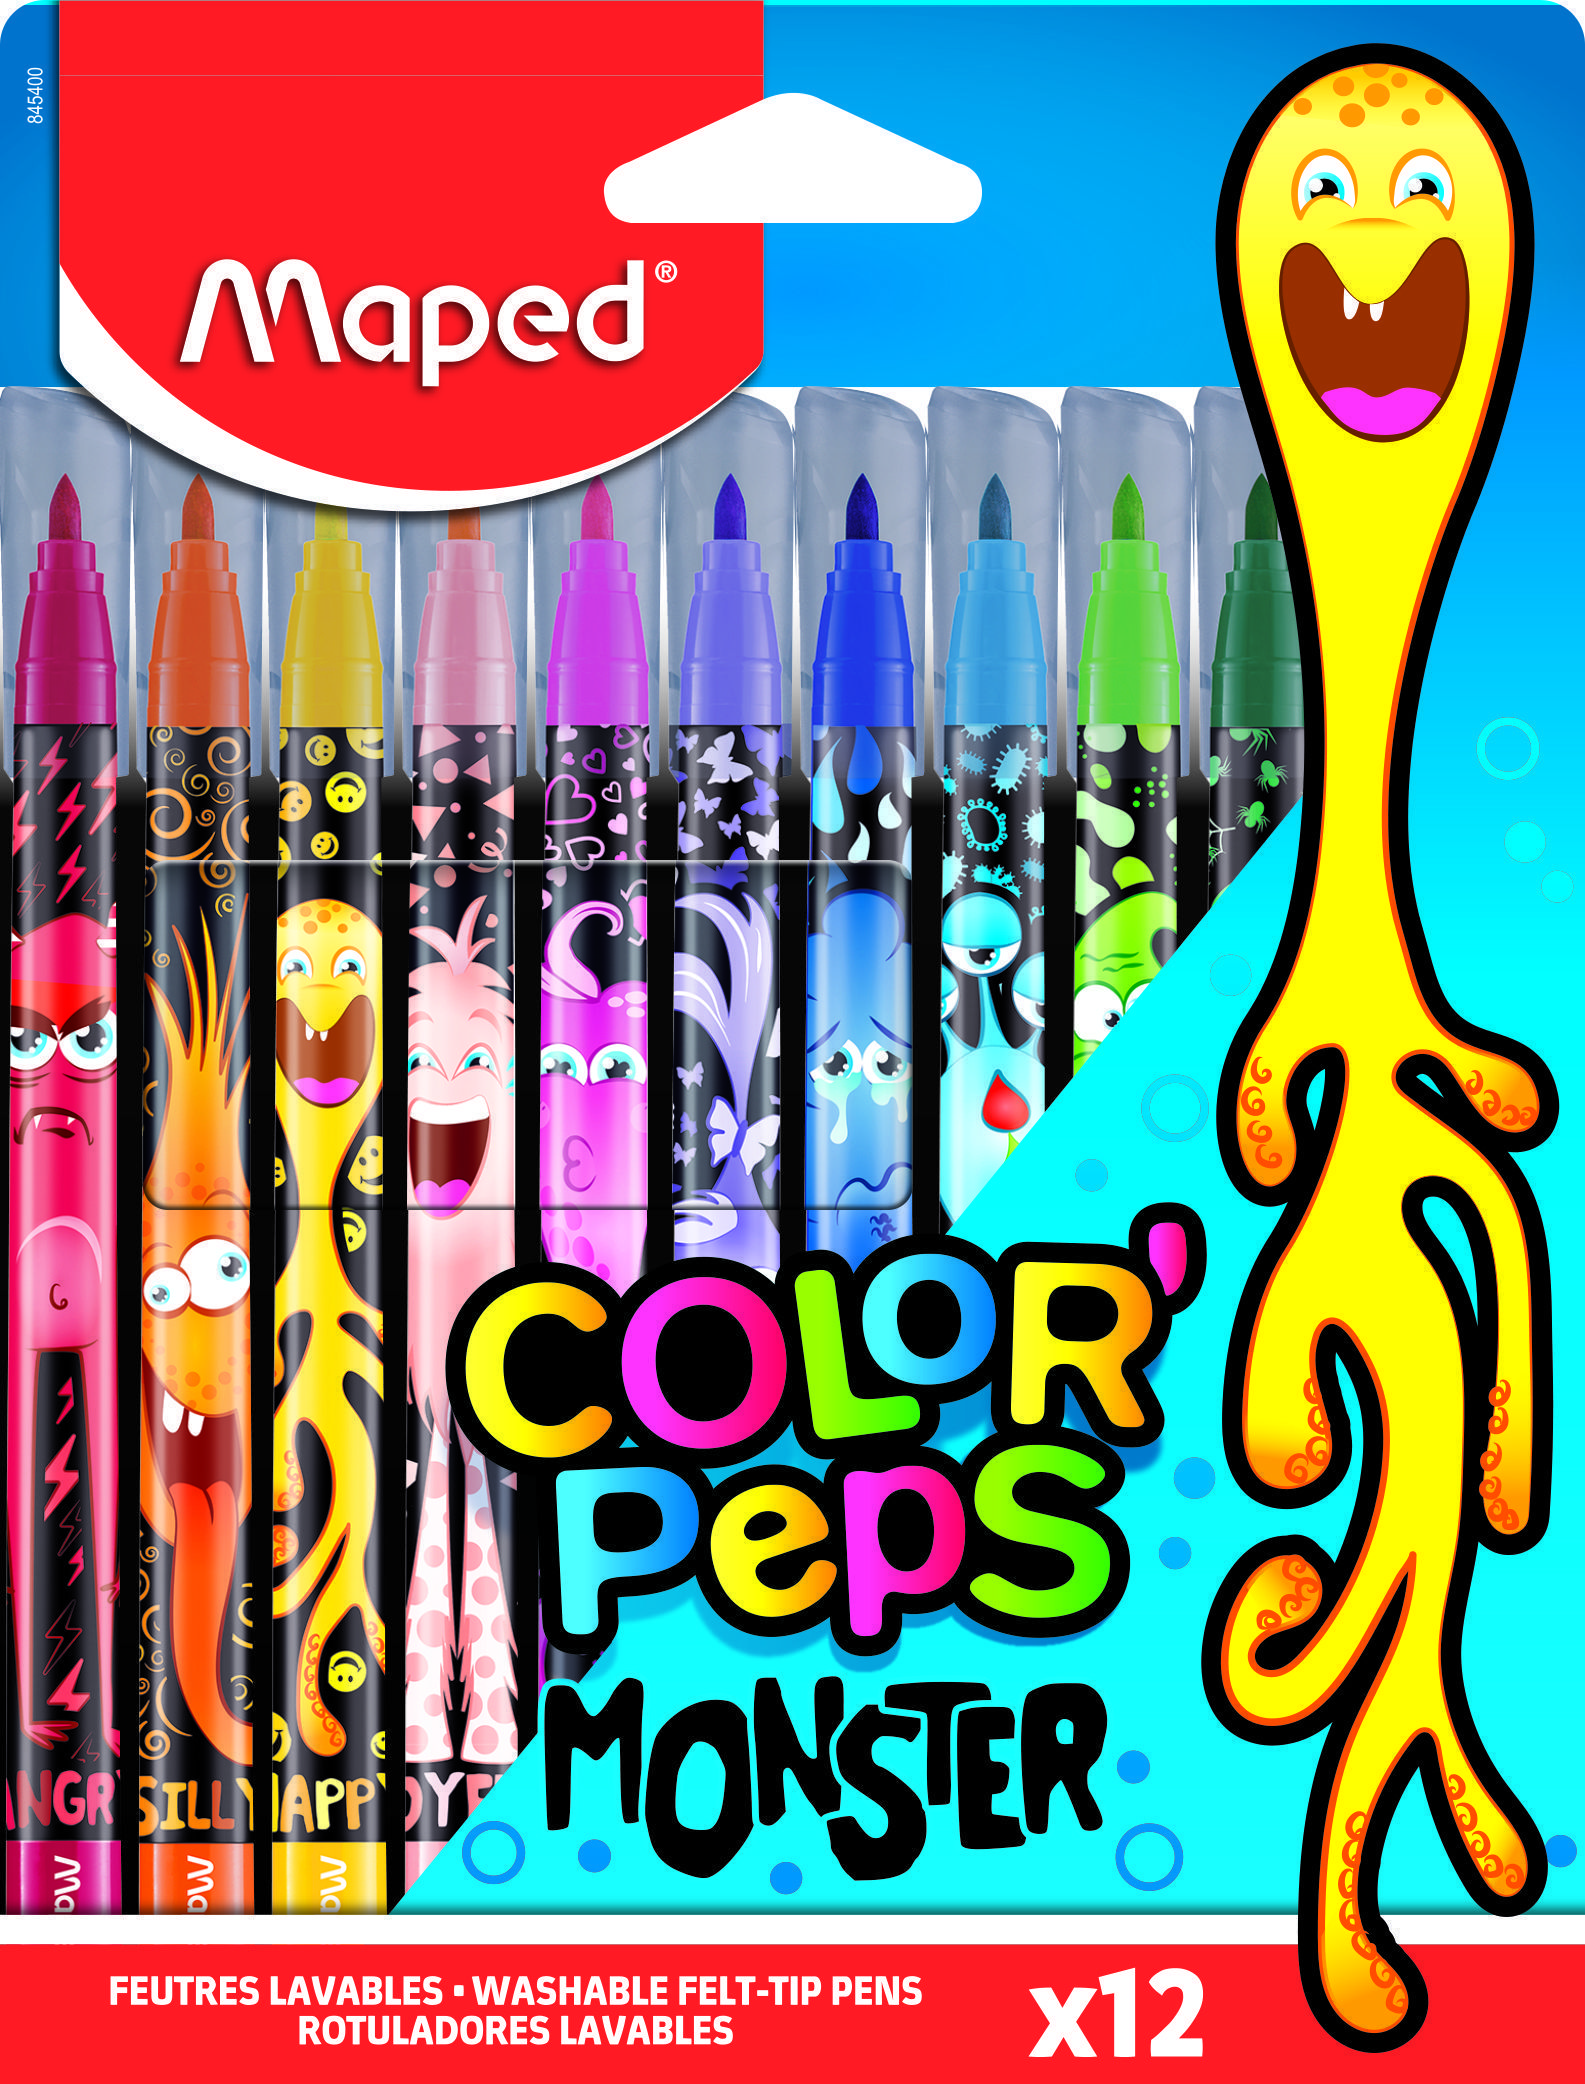  MAPED COLOR'PEPS MONSTER    ,   , , ,   , 12  